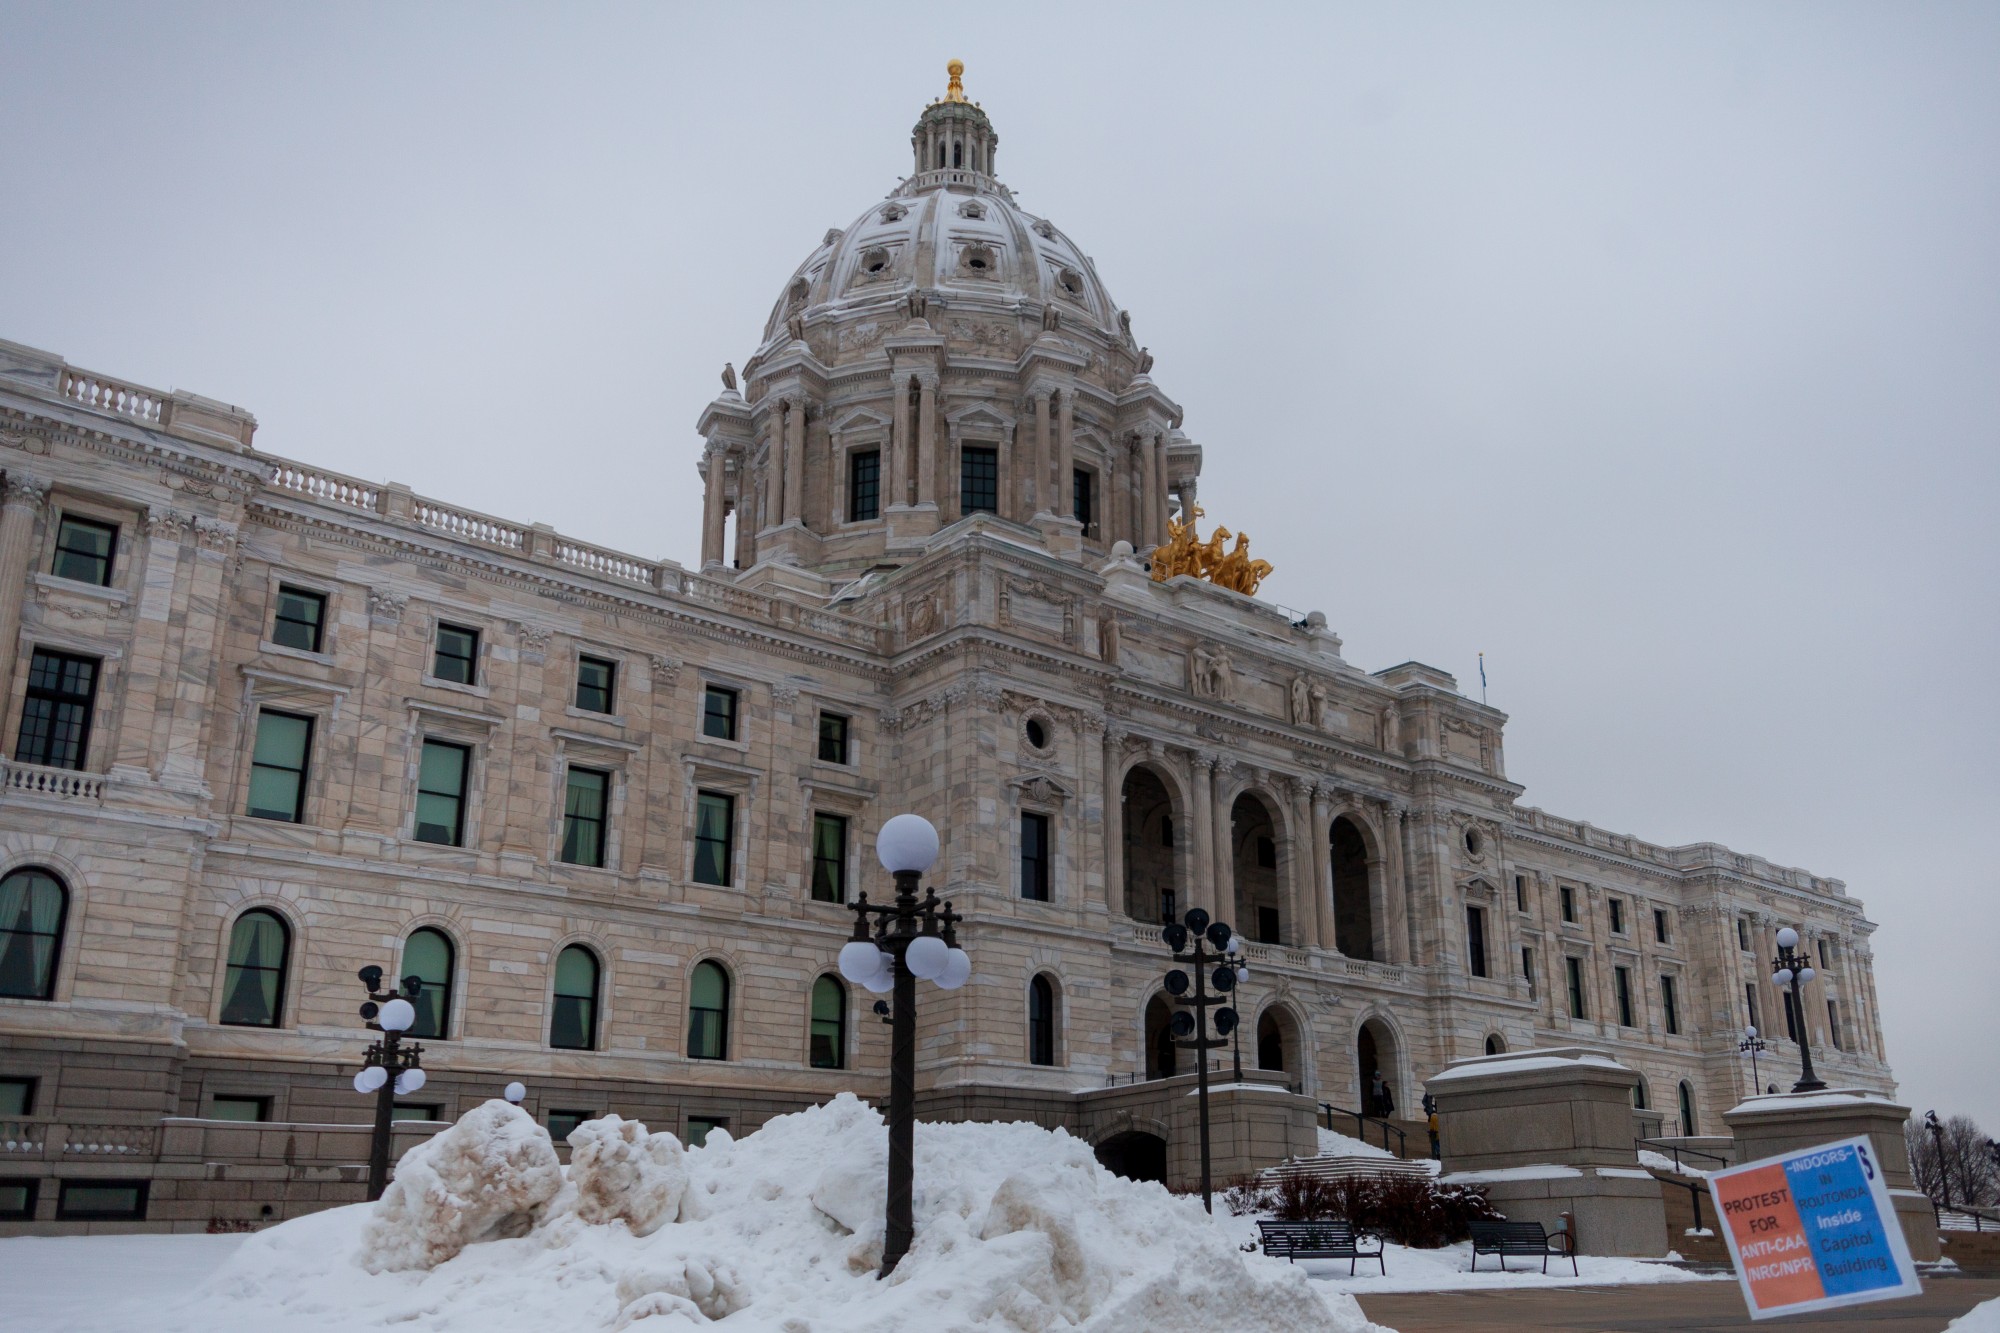 A sign guides protestors to an event opposing Indias recent passage of the Citizenship Amendment Act at the Minnesota State Capitol Building on Sunday, Jan. 26. This legislation offers Indian citizenship to refugees of several religious groups, but does not apply to Muslims, despite their making up nearly 15% of the Indian population.